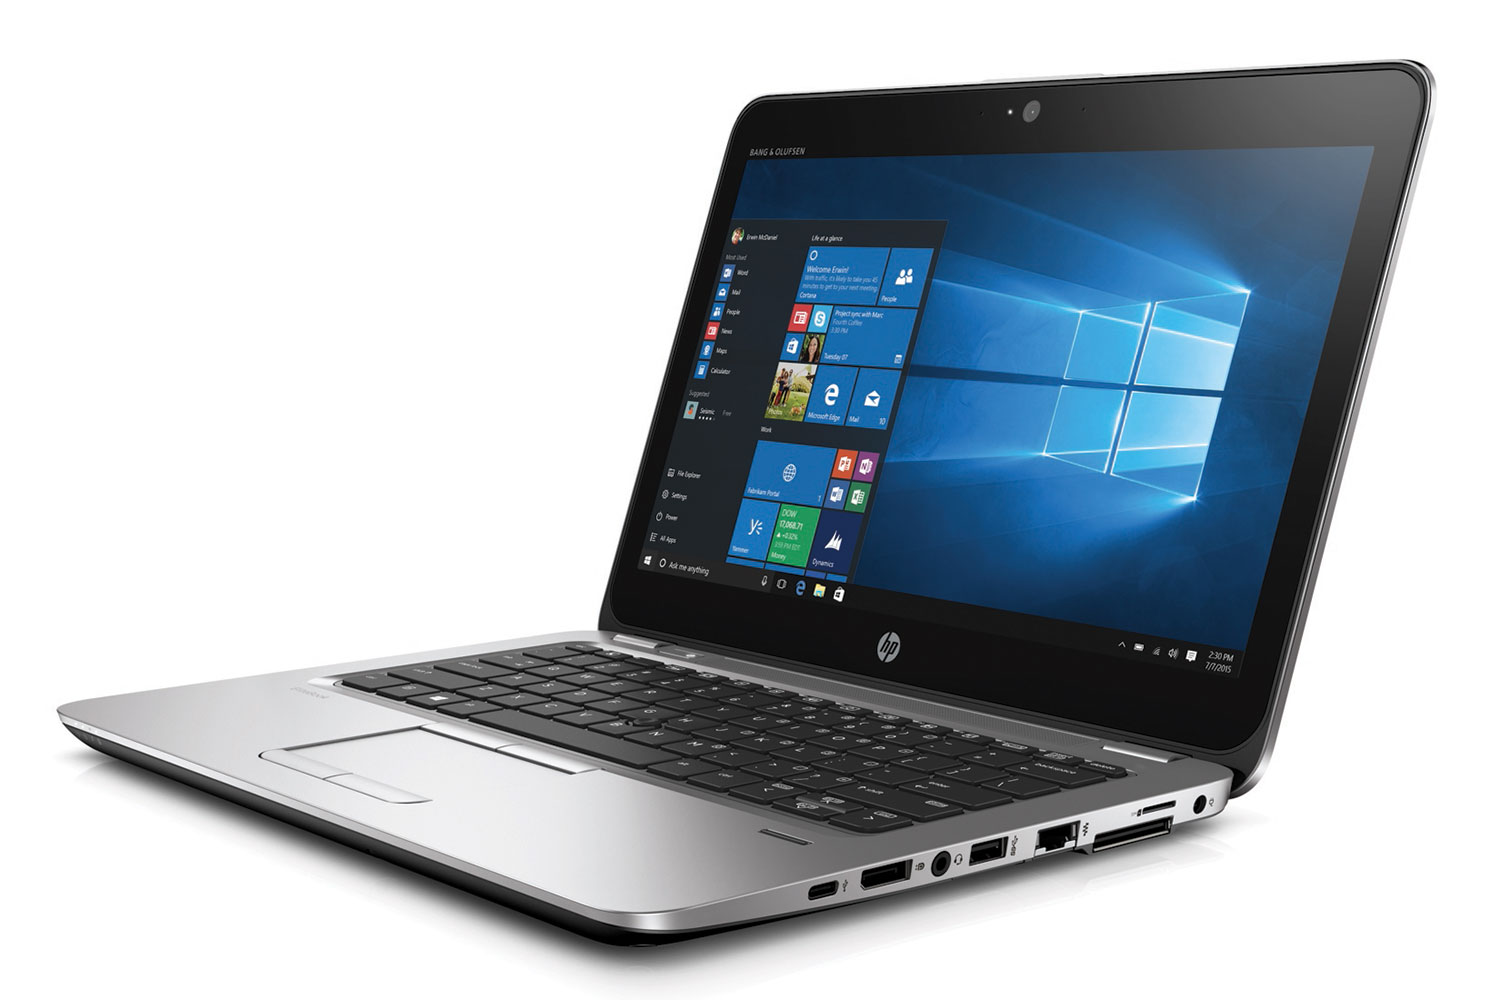 hps new elitebook folio is a half inch thick laptop with 4k display hp 800 g3 series hp20151103079